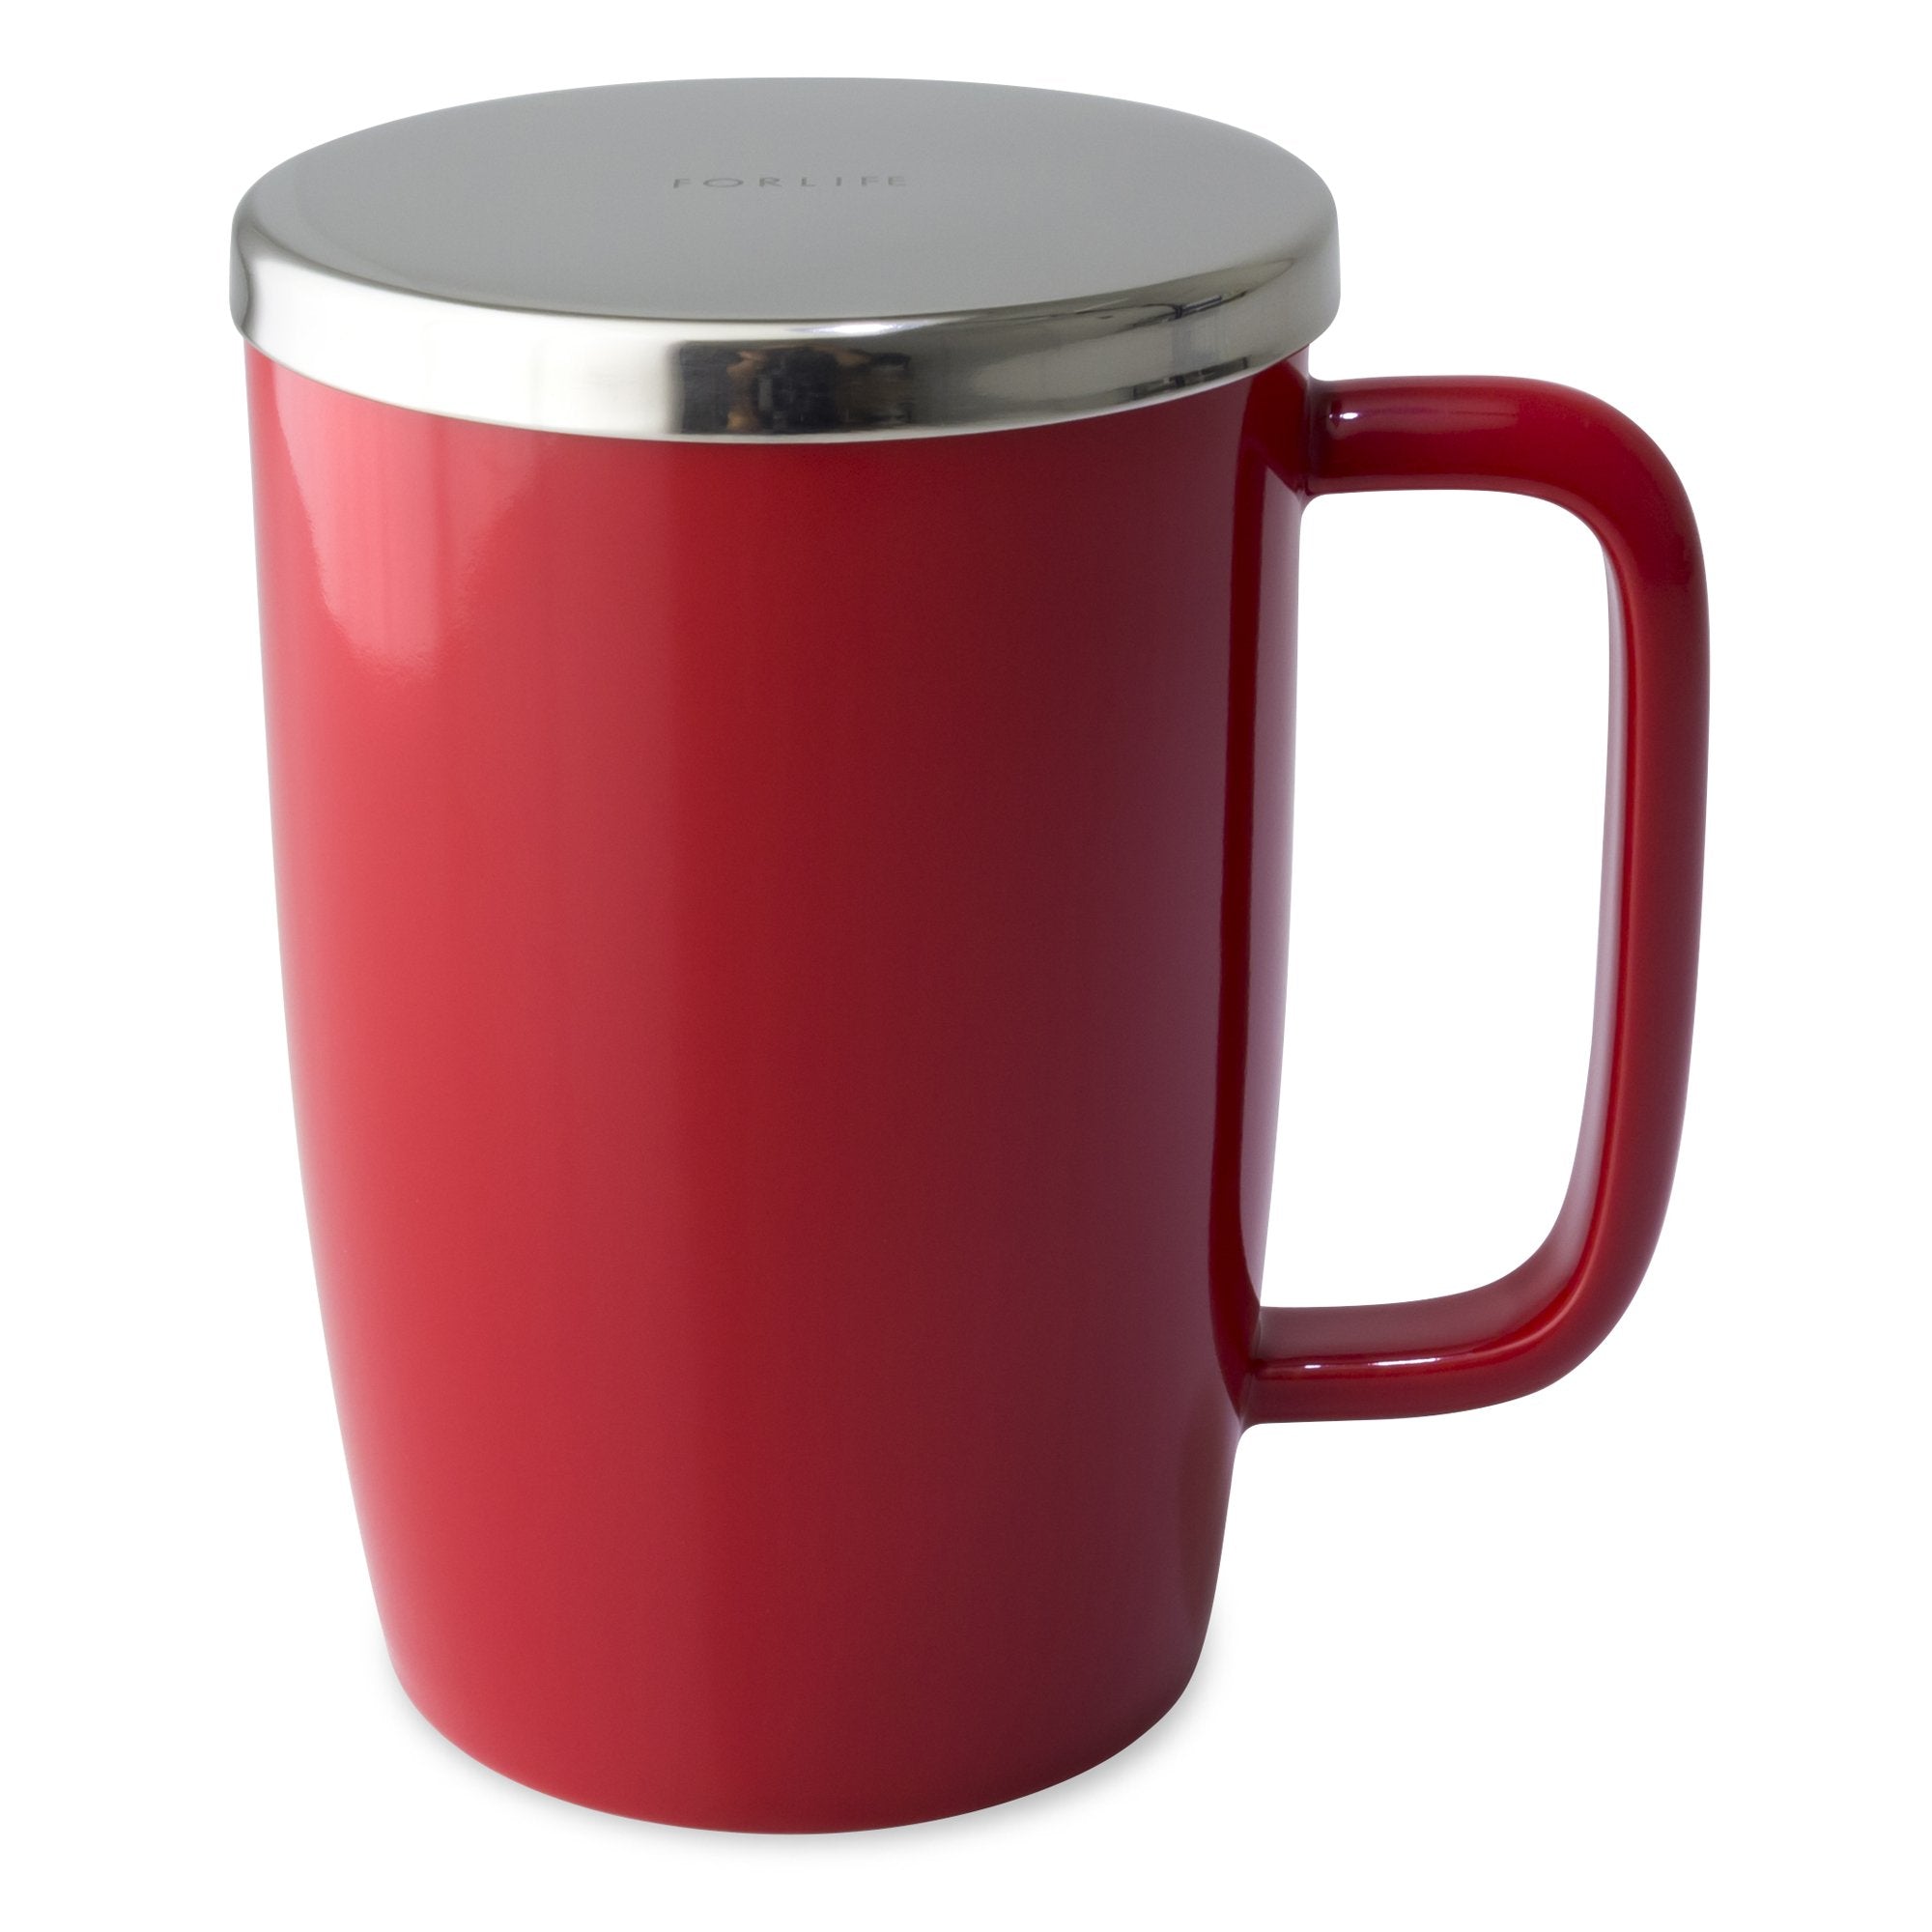 TeaLula 18 oz red colored glossy surface finish mug with large thin rectangle handle and shiny stainless steel lid